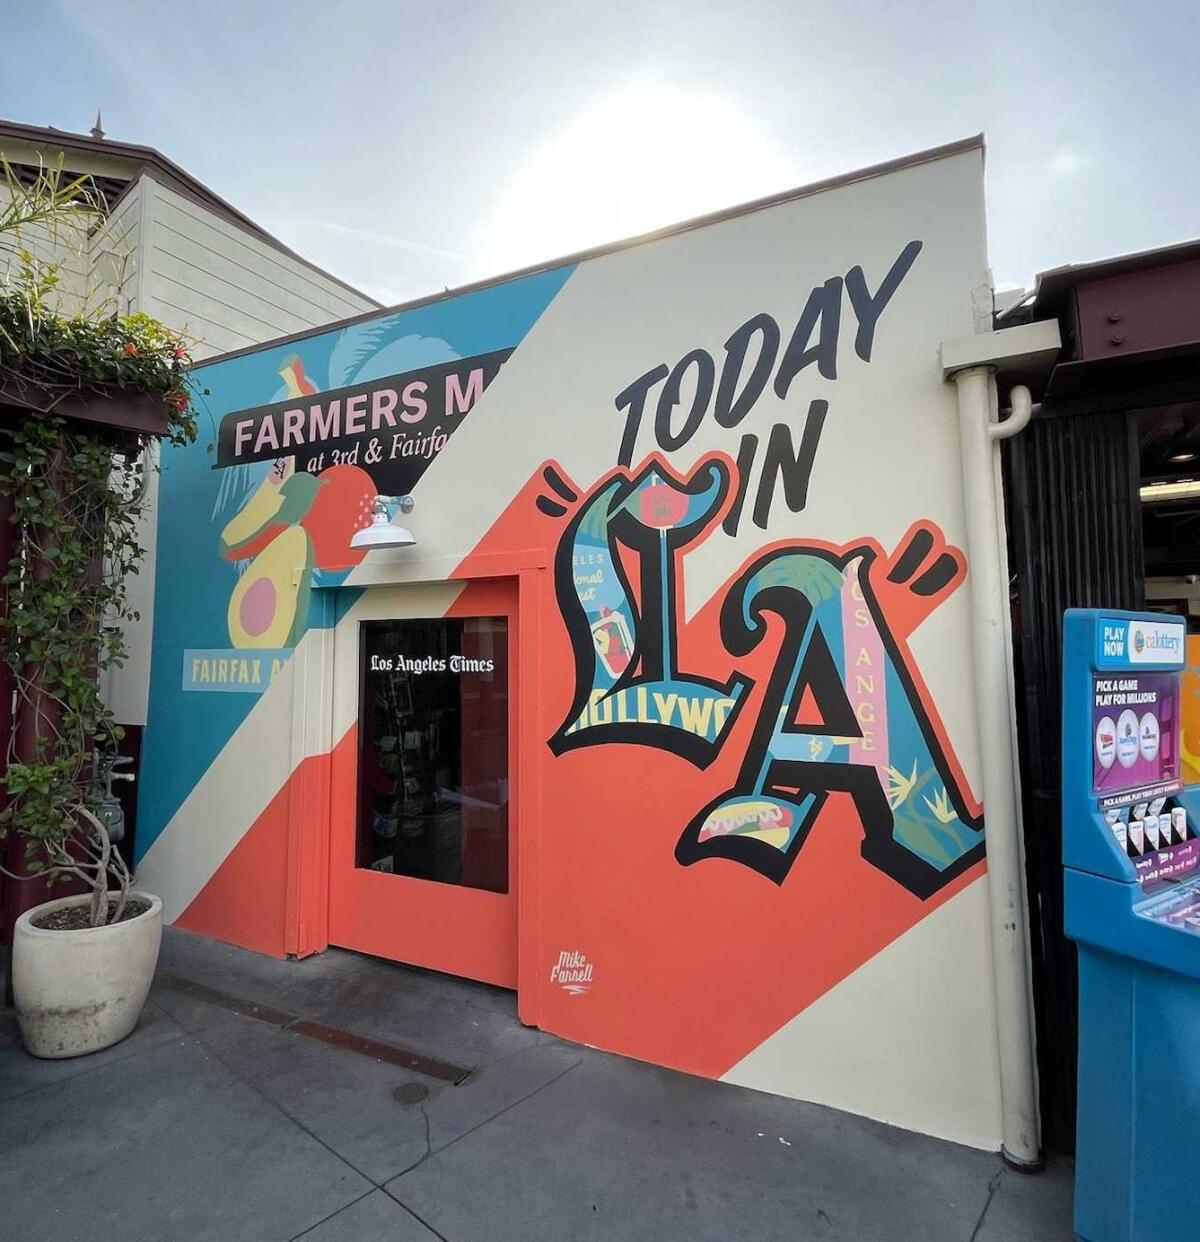 The new mural lends itself to a photo moment, where visitors can capture their trip to the Farmers Market Newsstand.